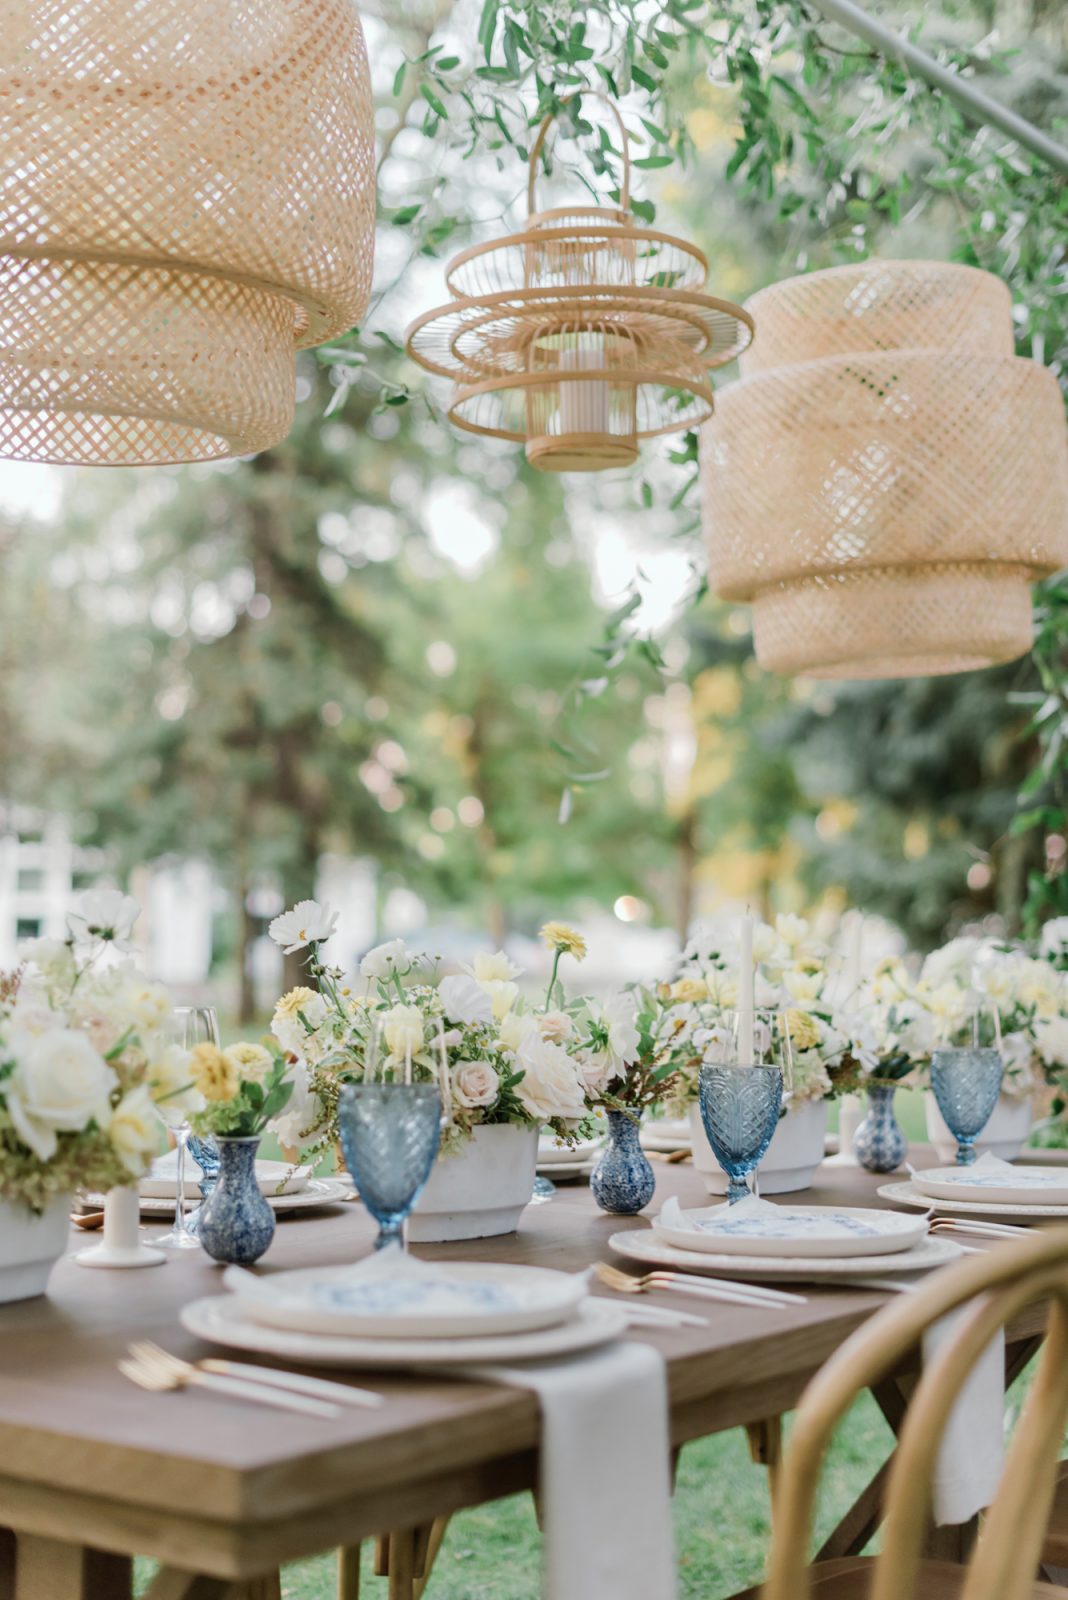 Pantone Colours of The Year In this Gorgeous Portugal-Inspired Wedding Editorial Featured by Brontë Bride, creative lighting, wedding reception